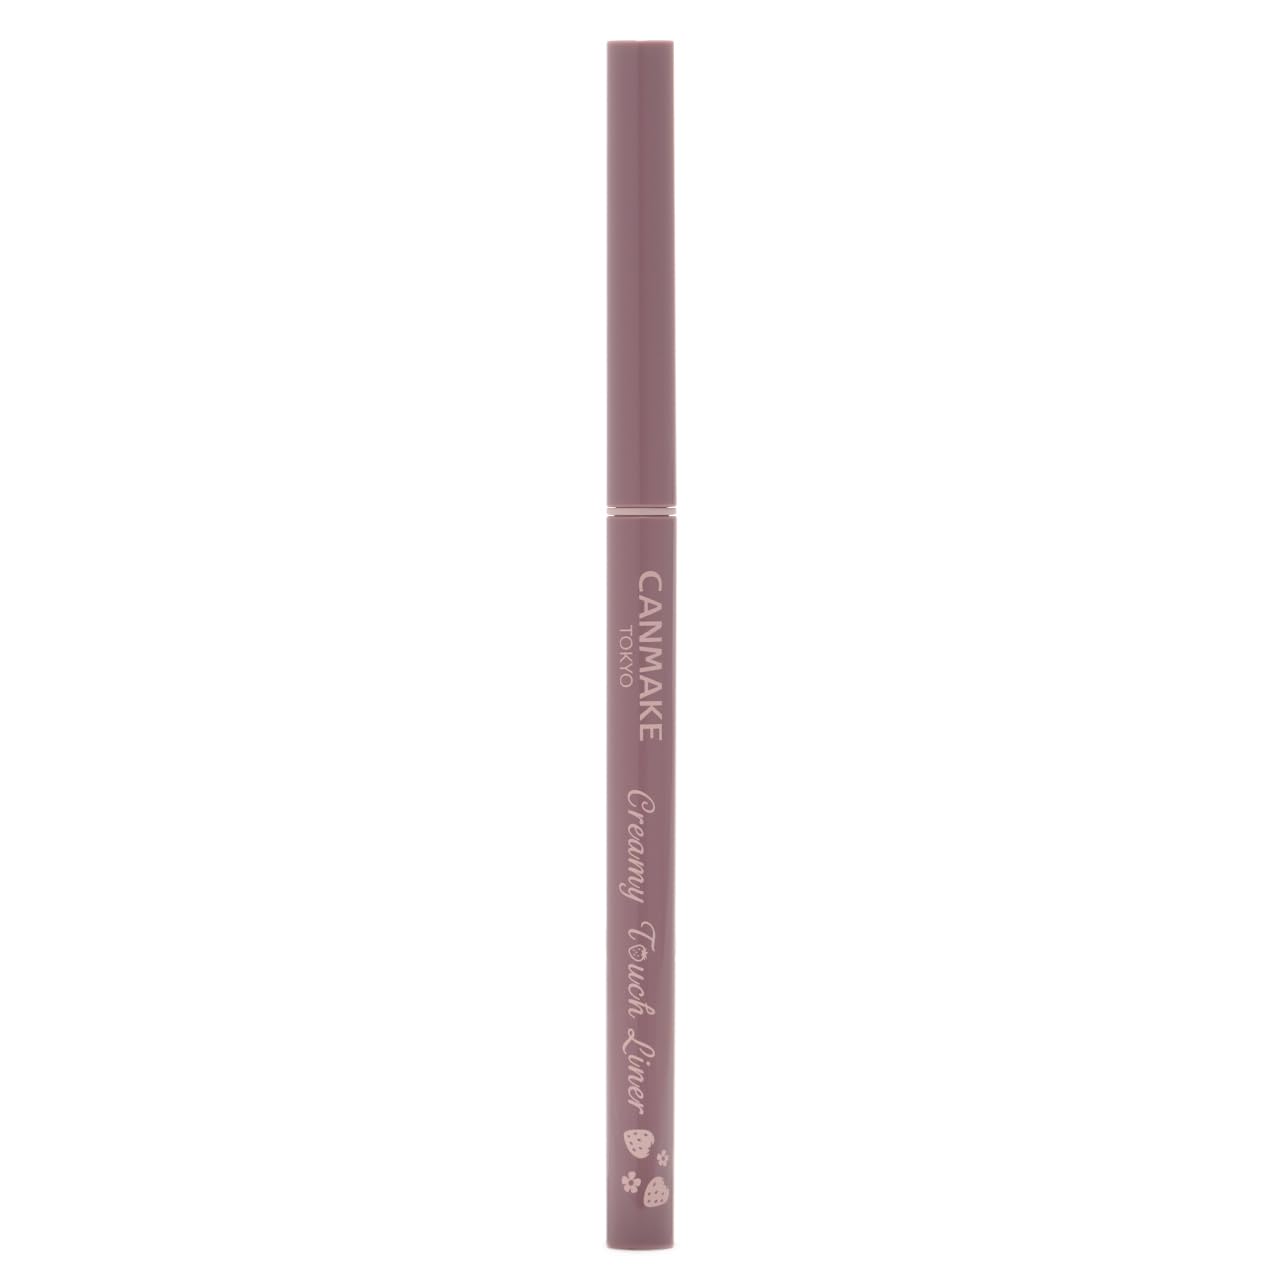 Canmake Creamy Touch Liner 12 Strawberry Storm Fine Pink Gray Gel Eyeliner Pencil